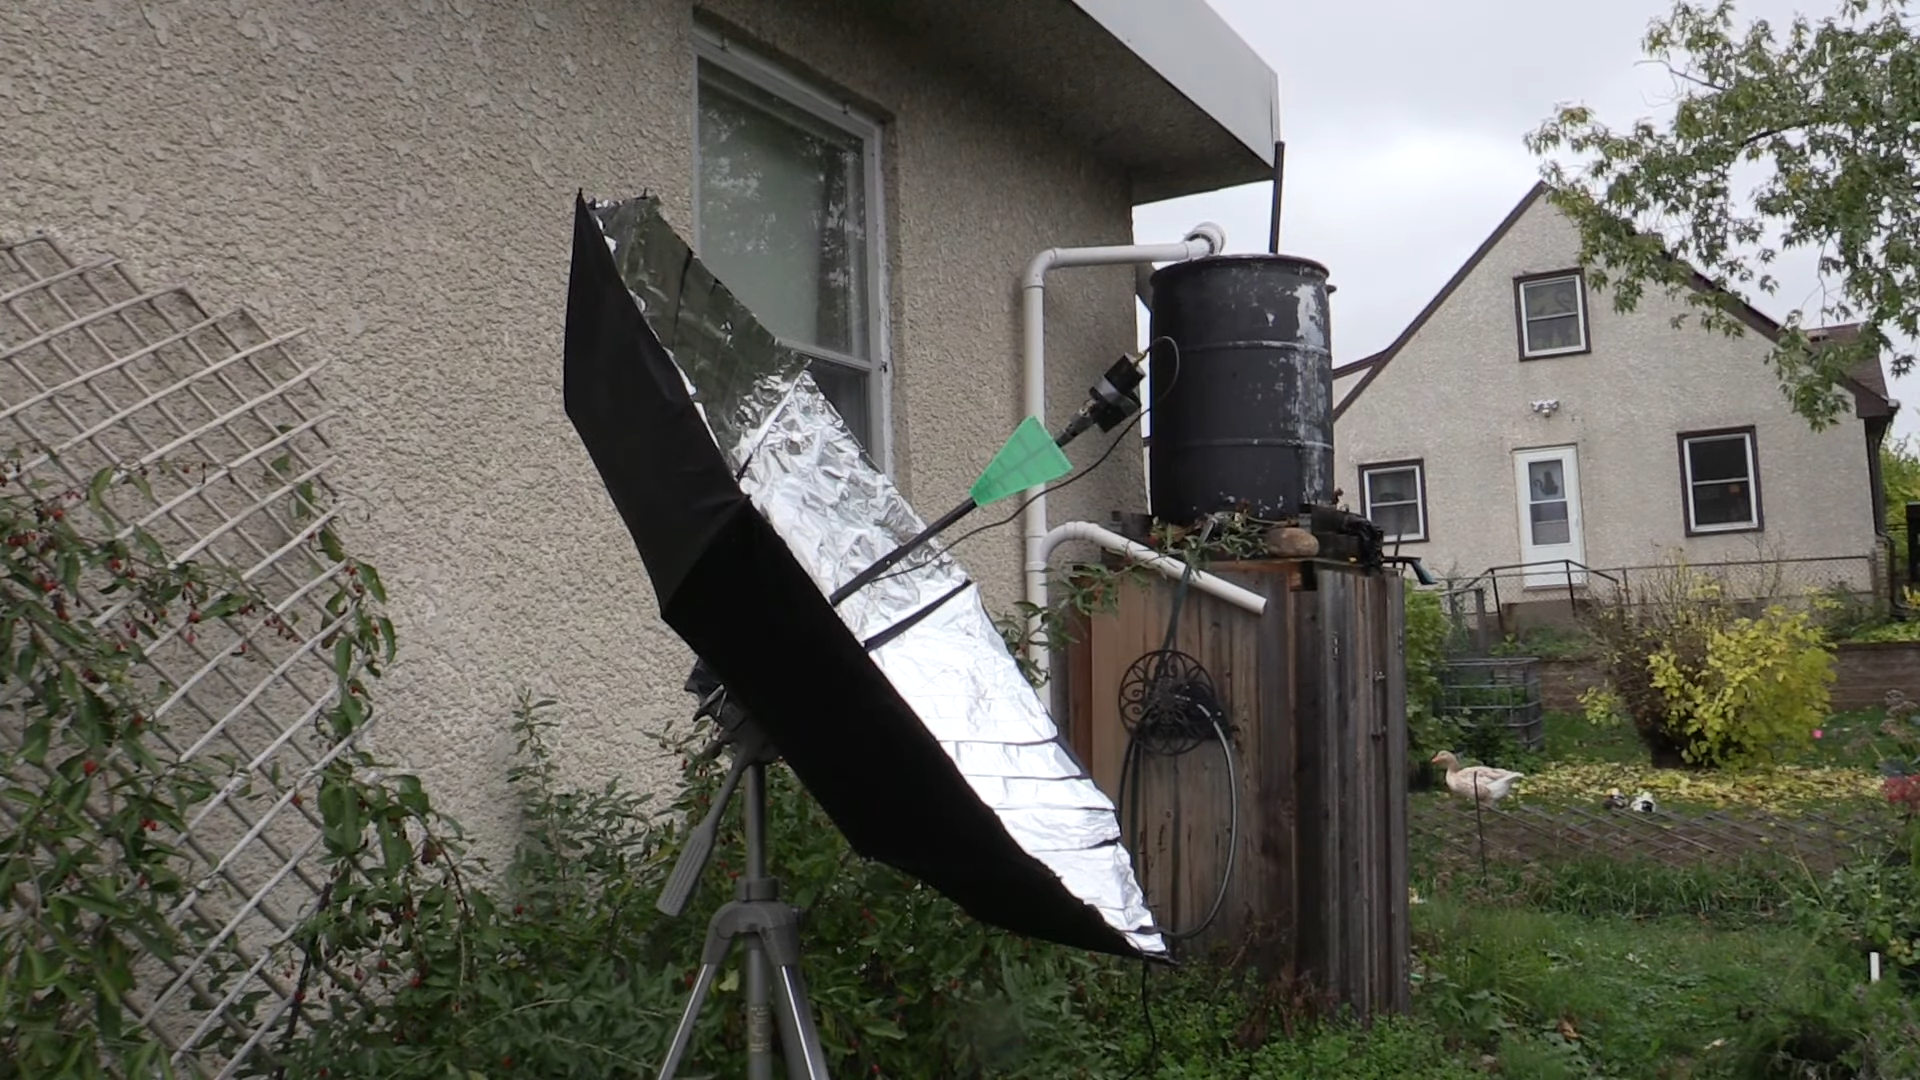 Umbrella Antenna Protects You From Rain, But Not The Way You Think